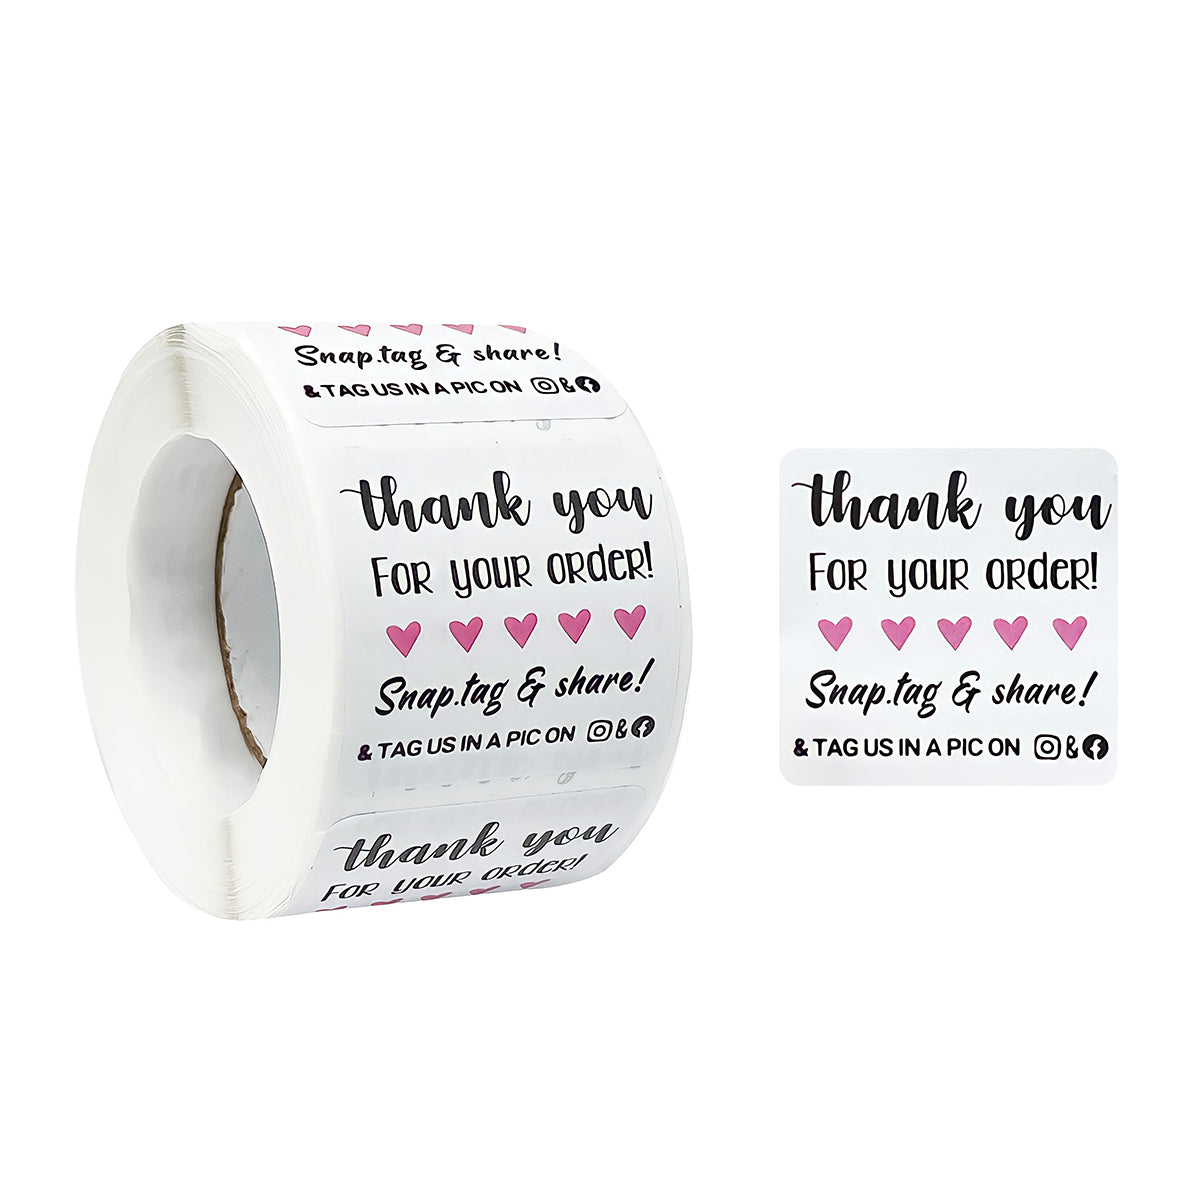 Wrapables 1.5 / 2 Thank You Stickers Roll, Sealing Stickers and Labels for Boxes, Envelopes, Bags, Small Businesses, Weddings, Parties (500pcs)